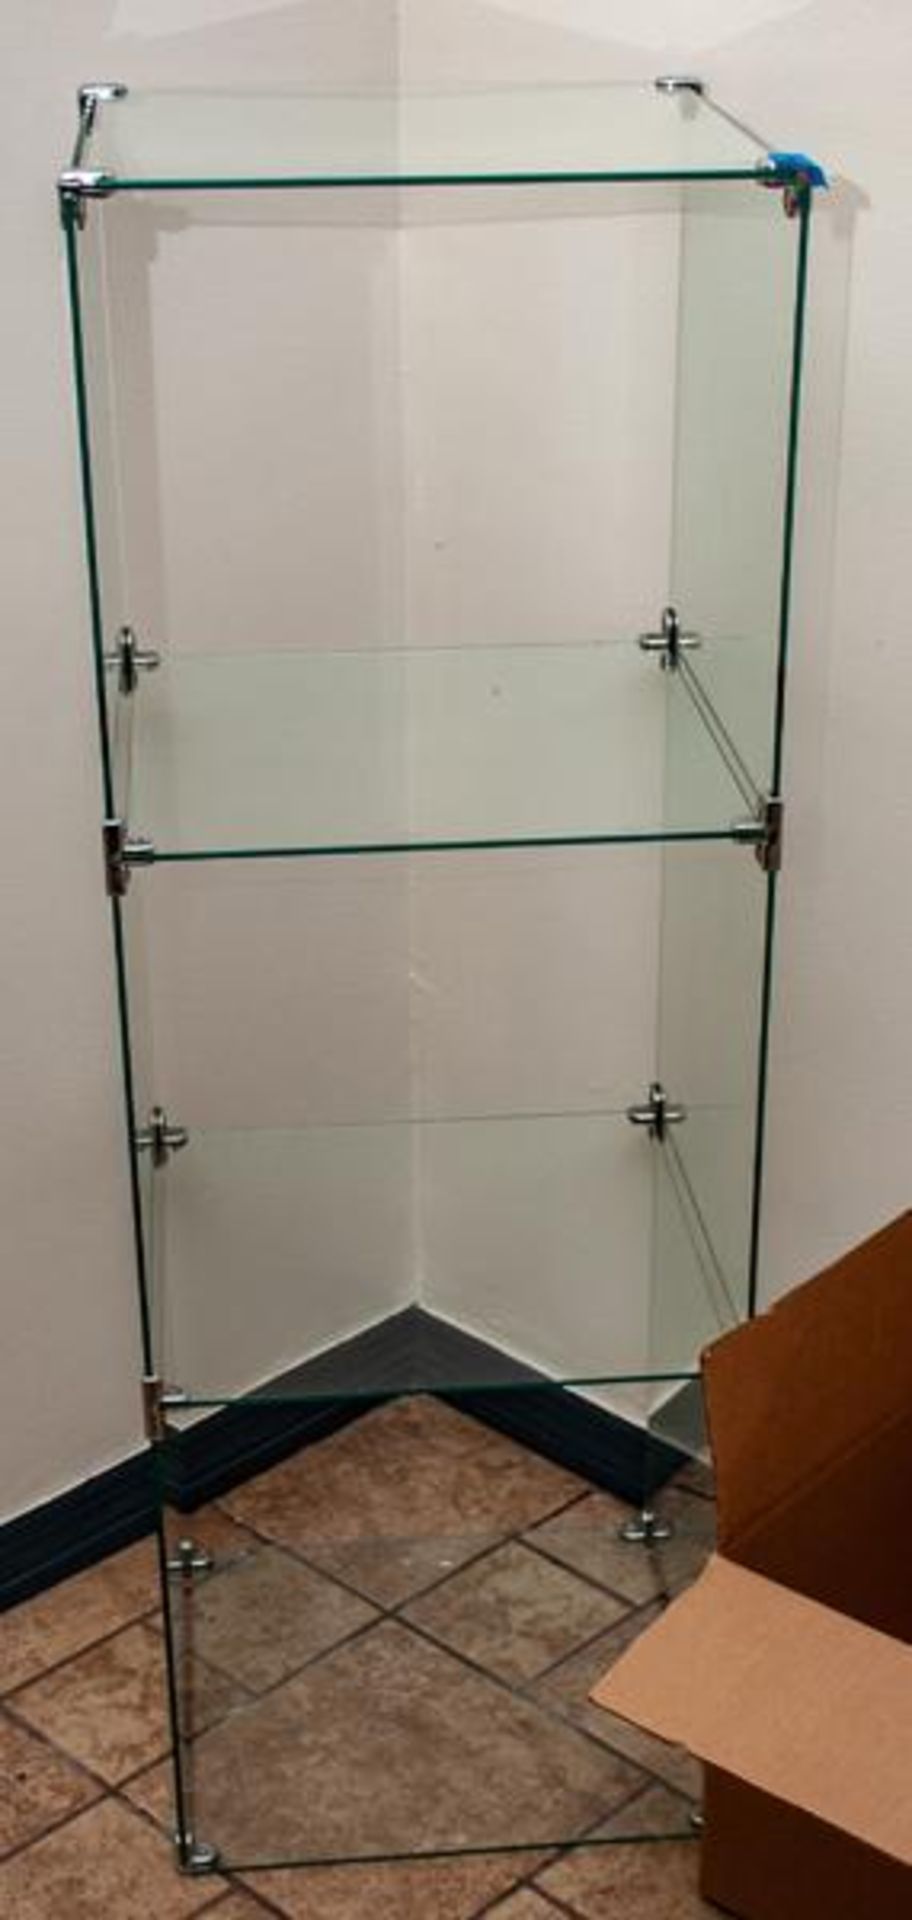 Conference room table 110" x 44" (6) chairs, glass shelving unit, nothing attached to walls - Image 2 of 2